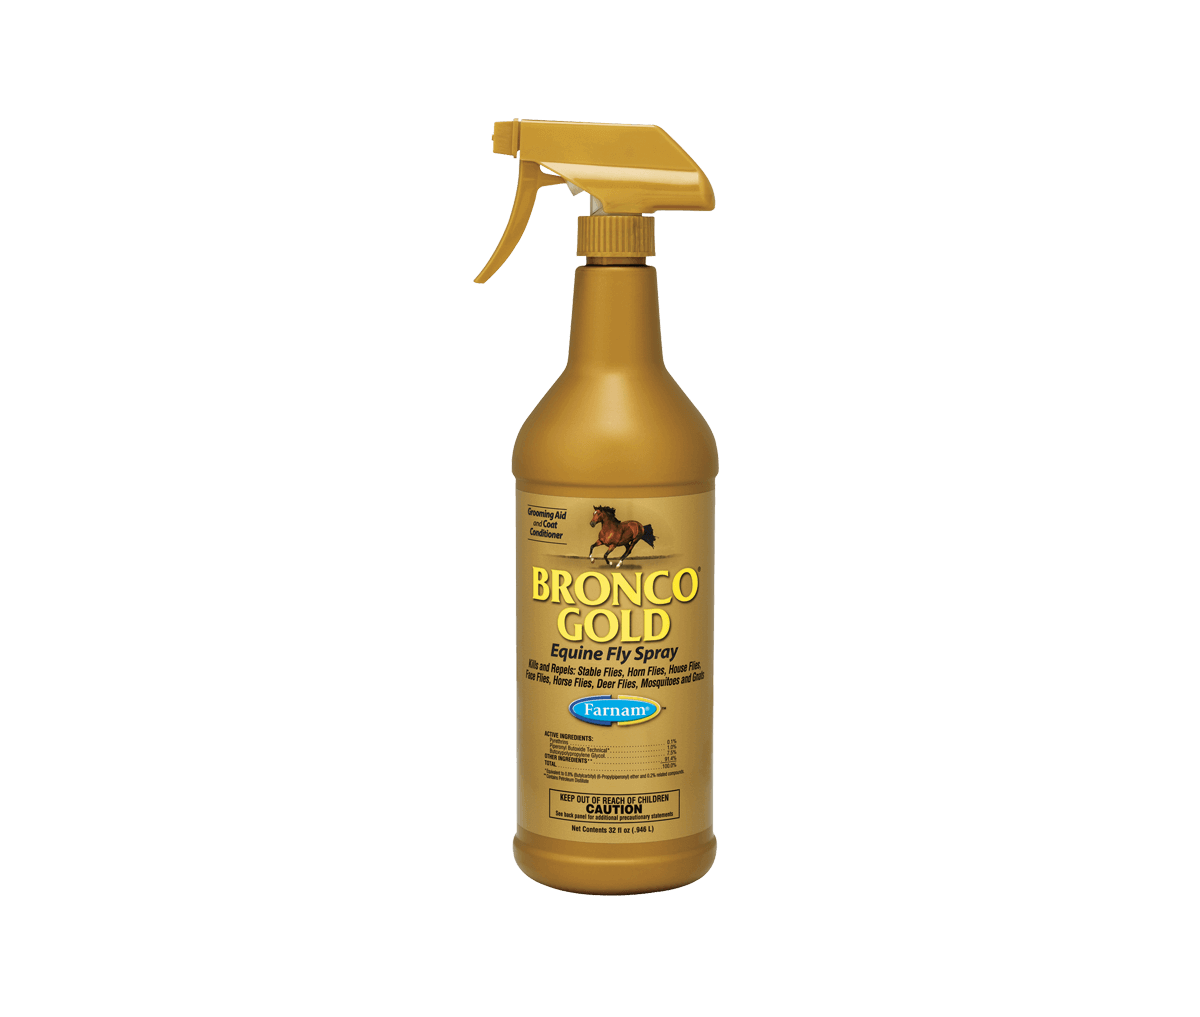 Bronco-Gold_32-oz-Spray_3005635_Product-Image-png